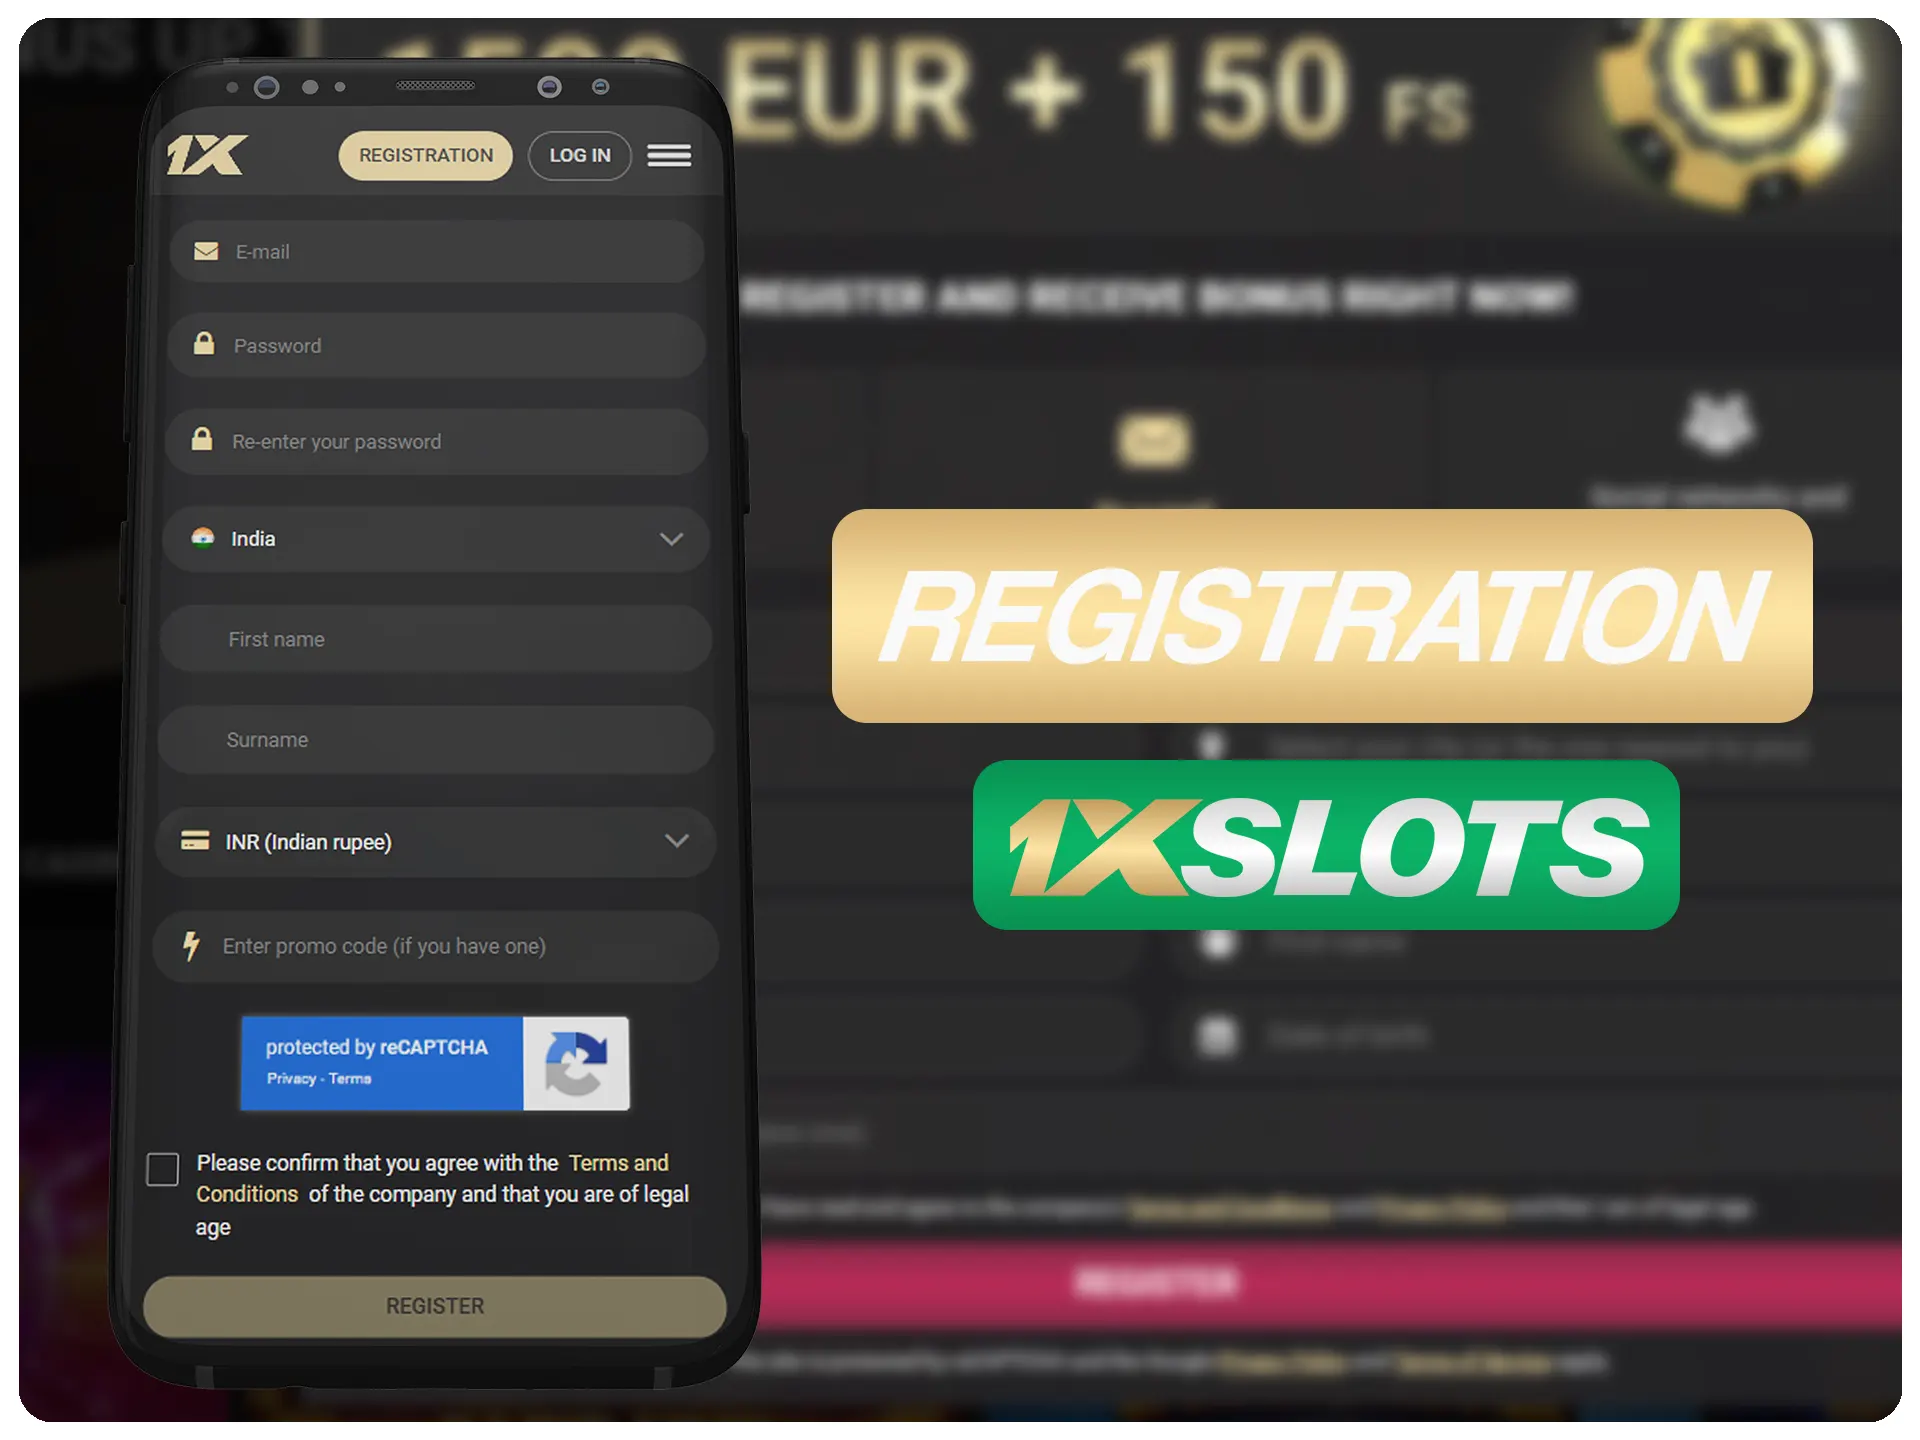 Register new 1xSlots account on registration page.